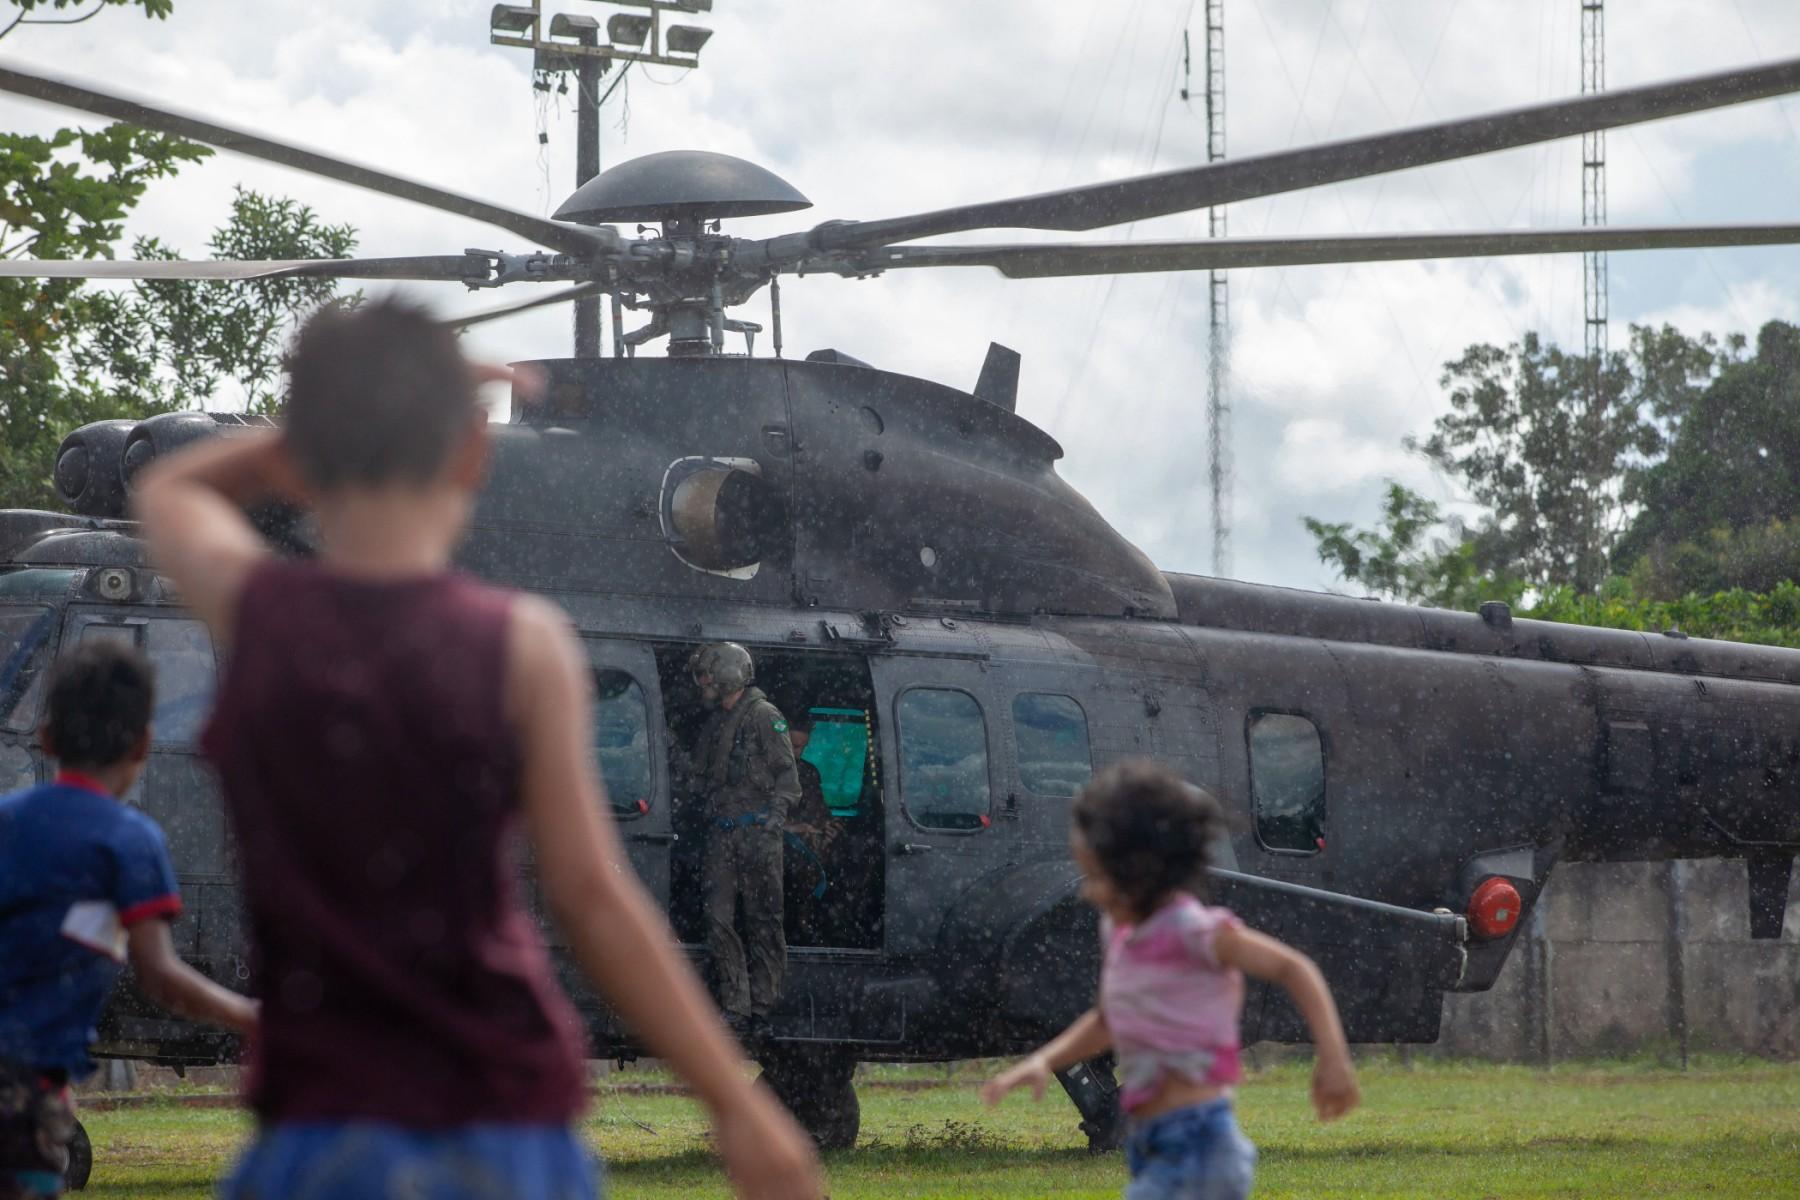 Children play next to a Brazilian army helicopter taking part in the search for missing indigenist Bruno Pereira and journalist Dom Phillips, in the municipality of Atalaia do Norte, state of Amazonas, Brazil on June 10. Photo: AFP